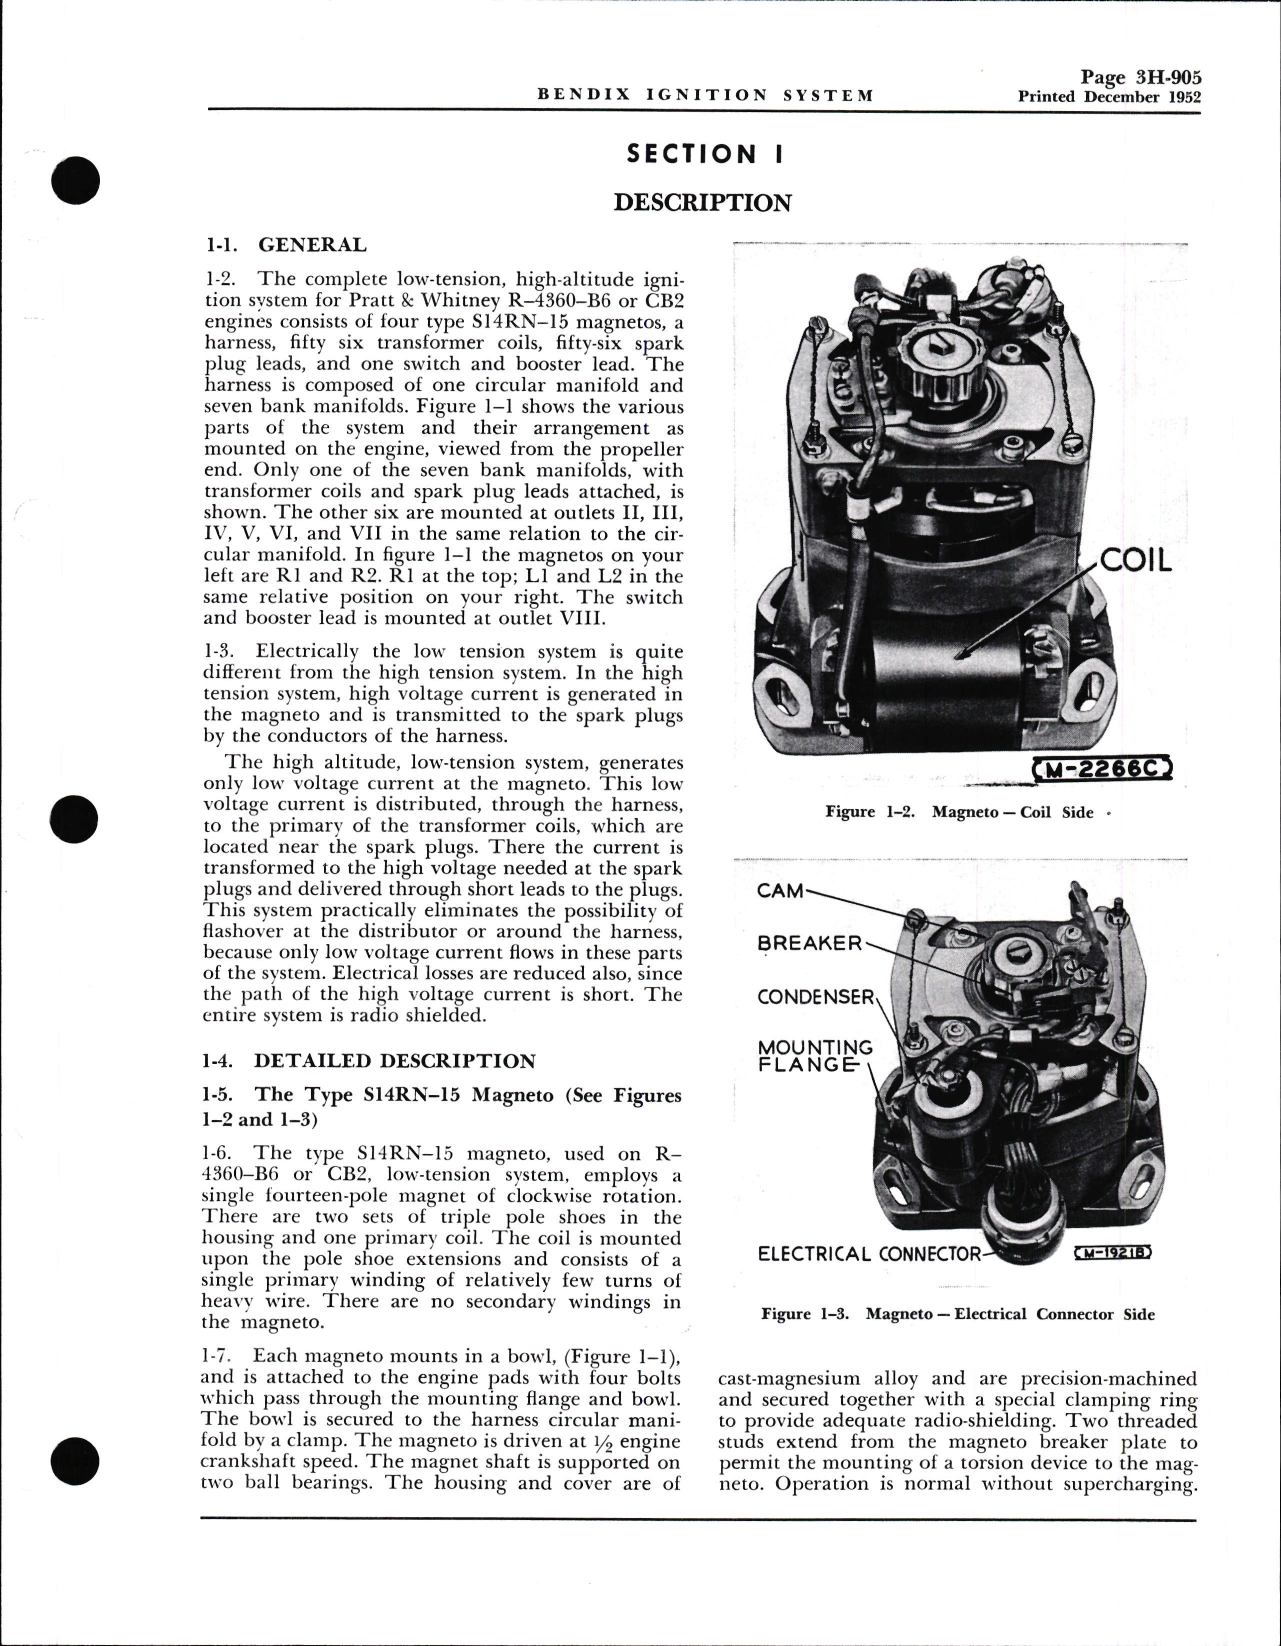 Sample page 5 from AirCorps Library document:  Installation, Service, & Maintenance Instructions for Bendix Low Tension - High Altitude Ignition System 